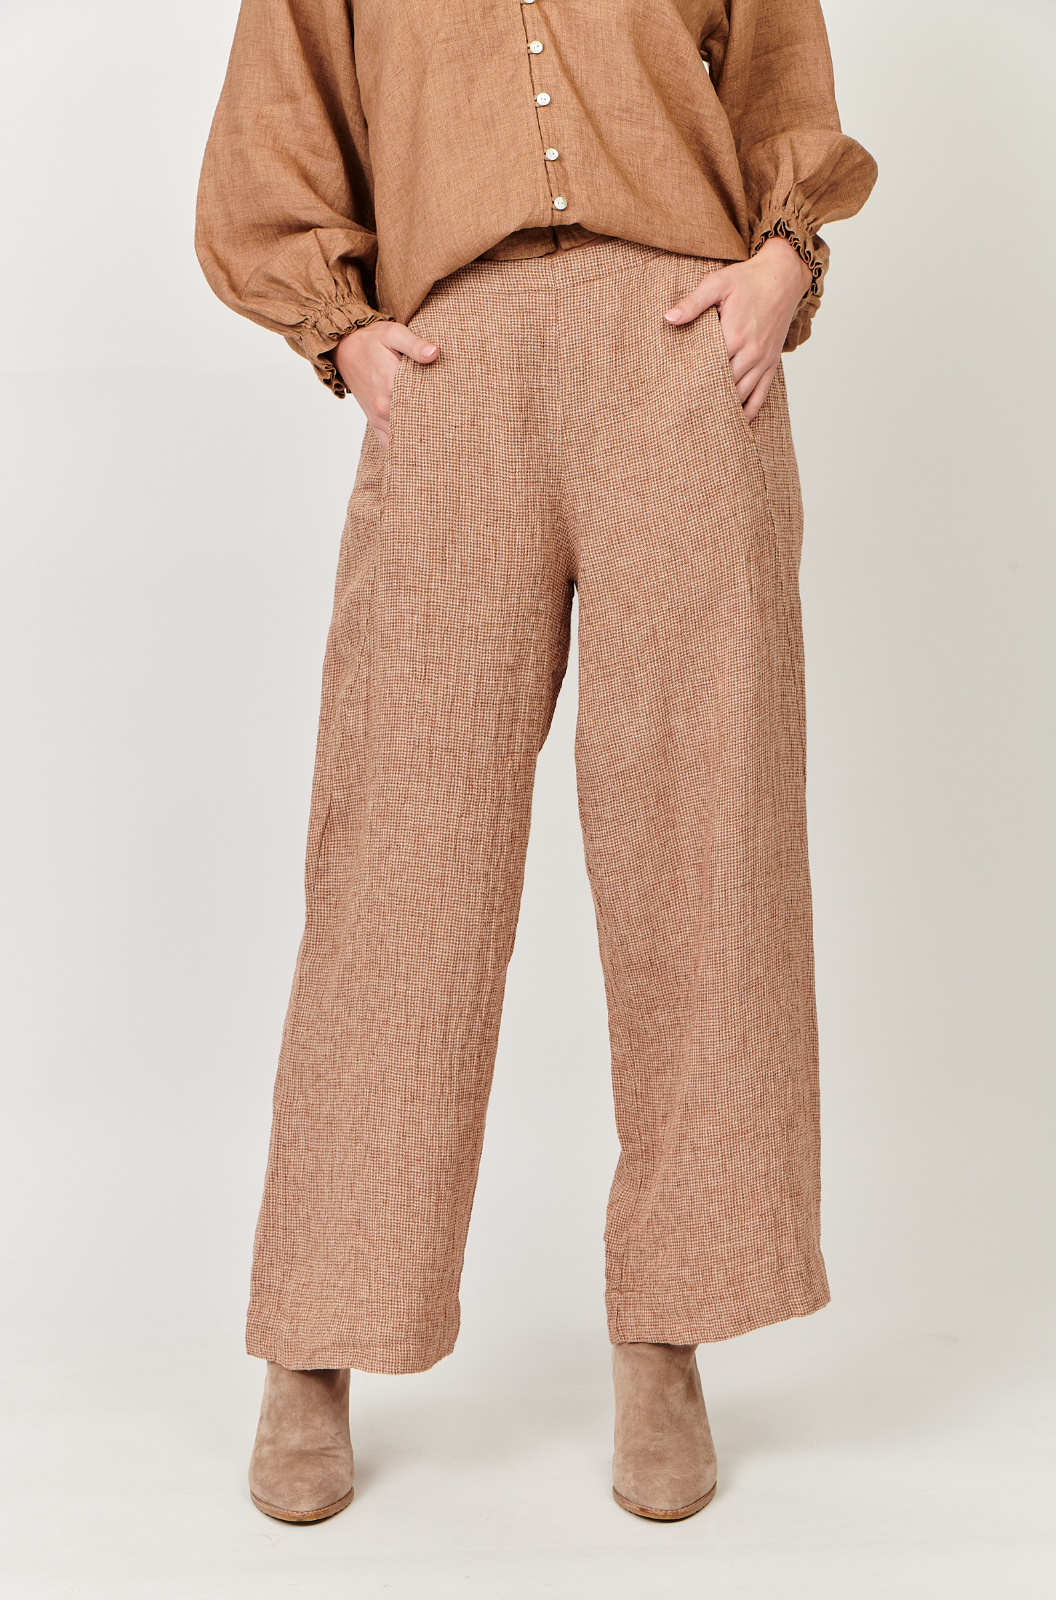 Naturals by O & J Linen Pant in Chai Puppytooth